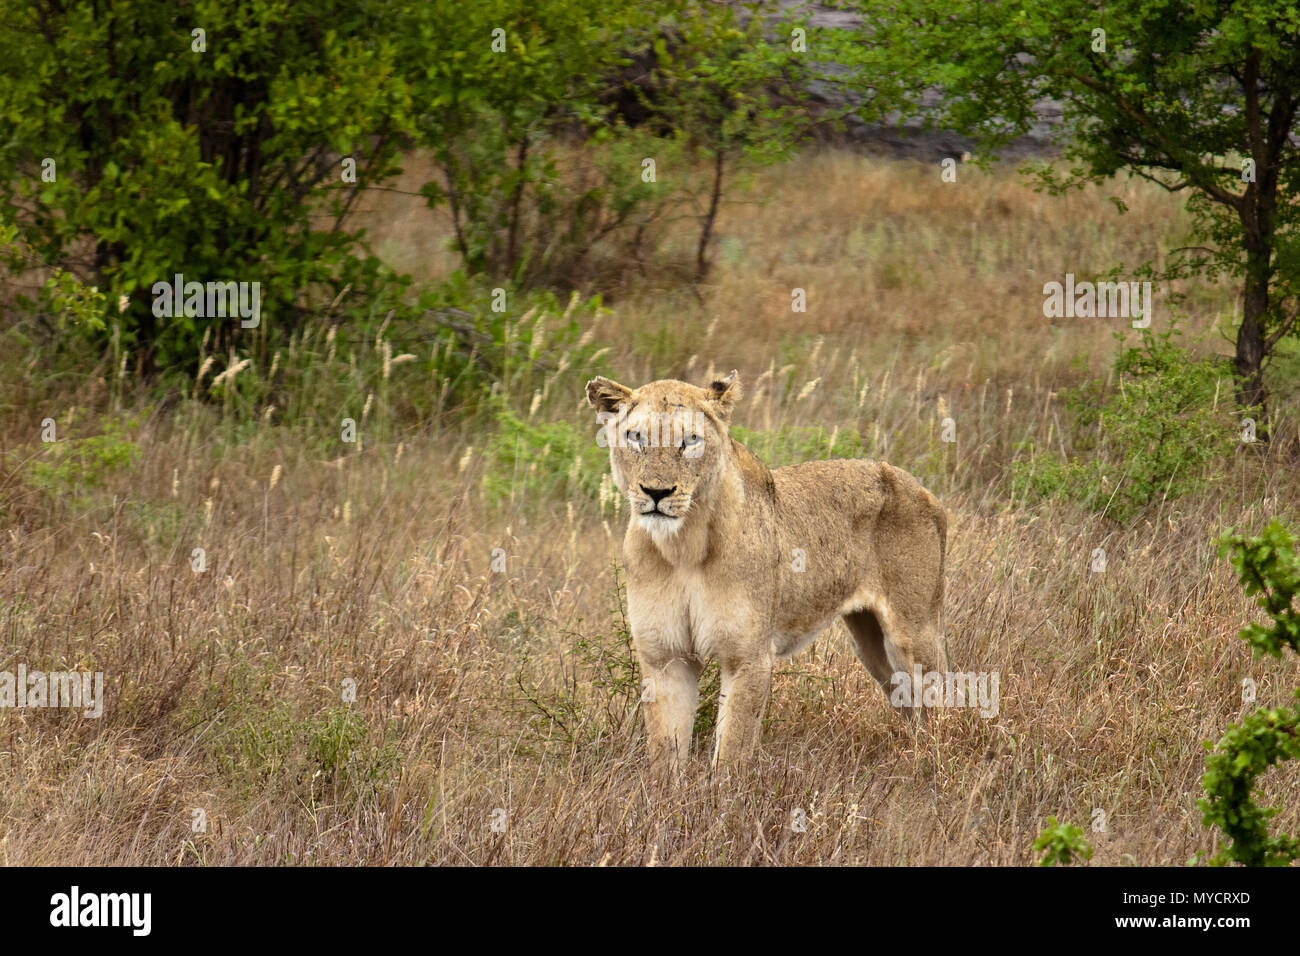 Female lion in South African savannah Stock Photo